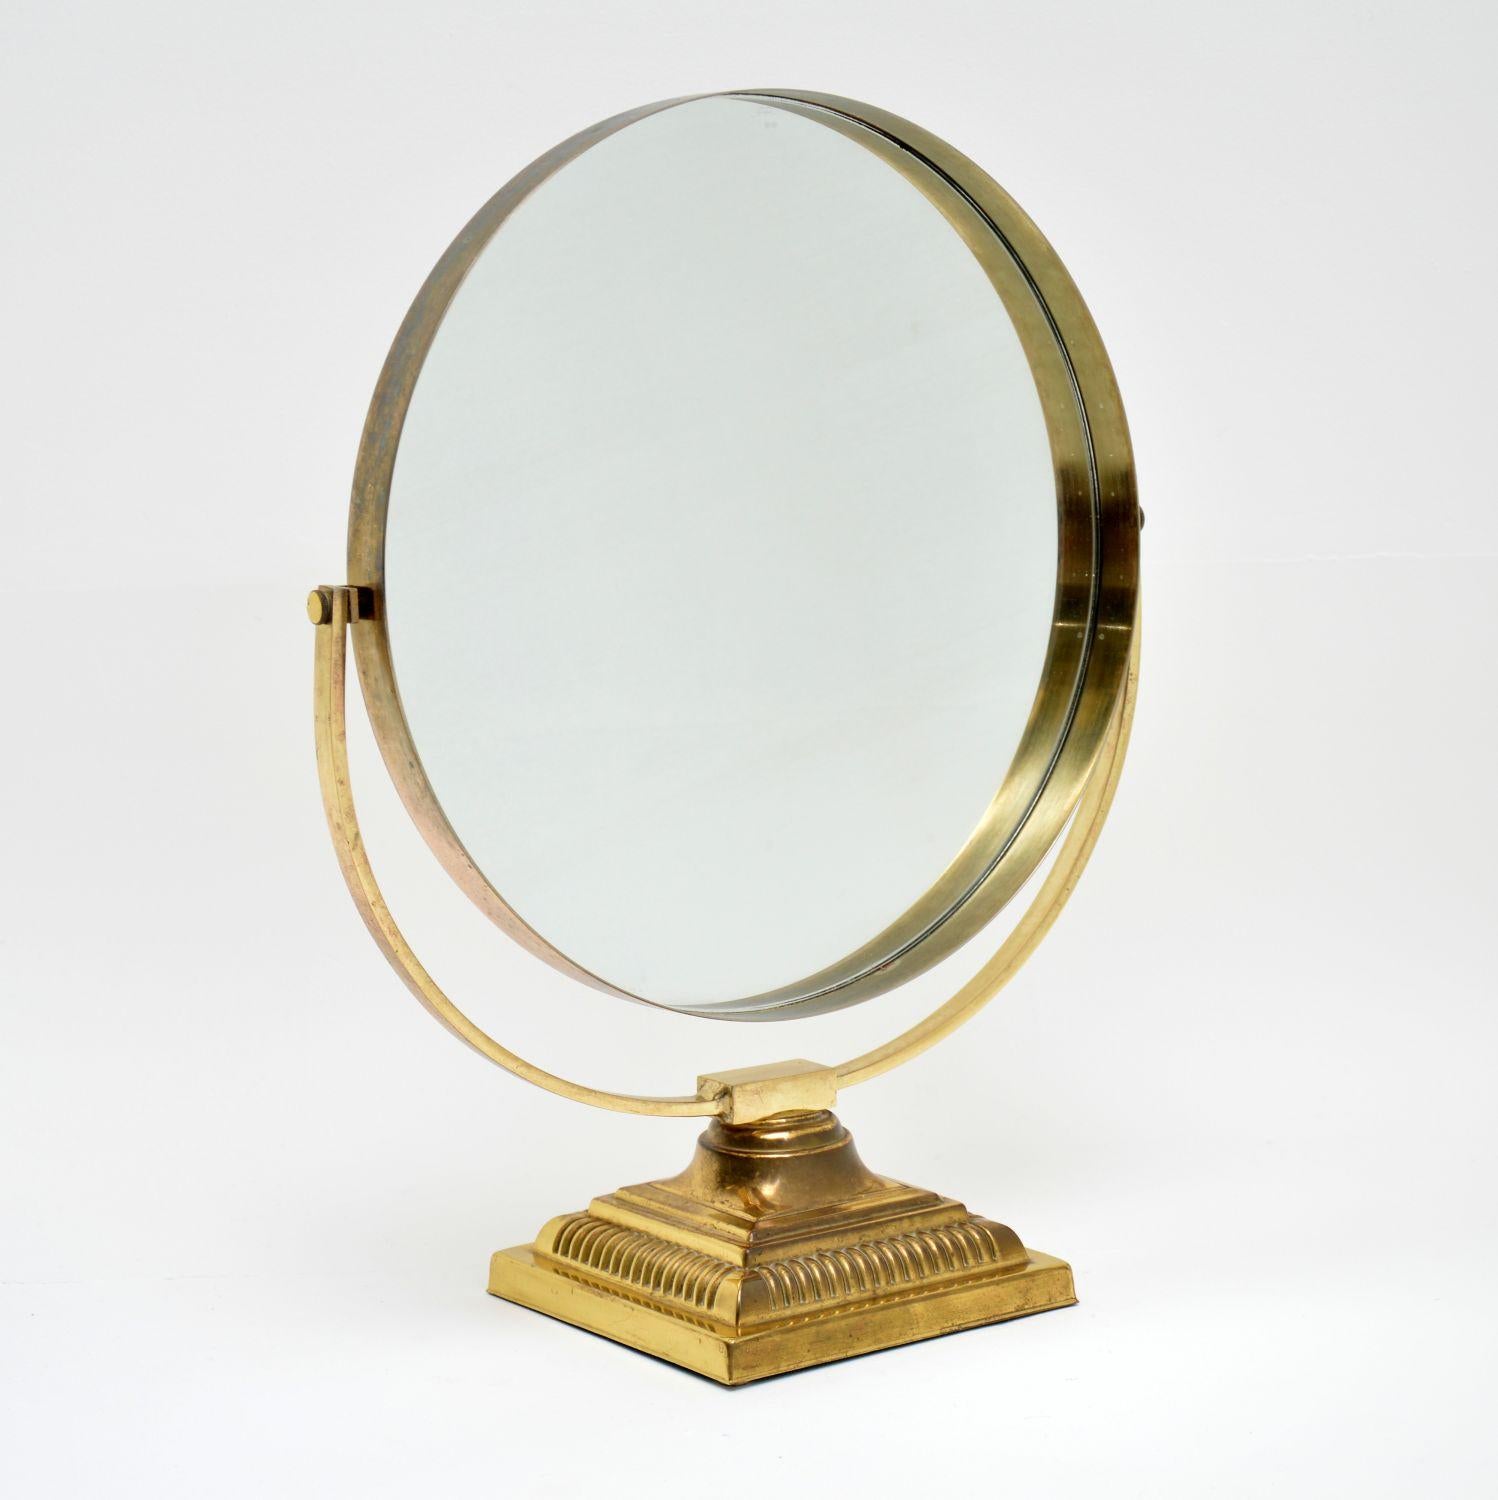 A beautiful pair of vintage brass vanity mirrors, these were made by Durlston designs. They date from the 1960’s, and are in lovely vintage condition. They just have some minor surface wear and tarnishing to the brass, seen in the images.

Width –